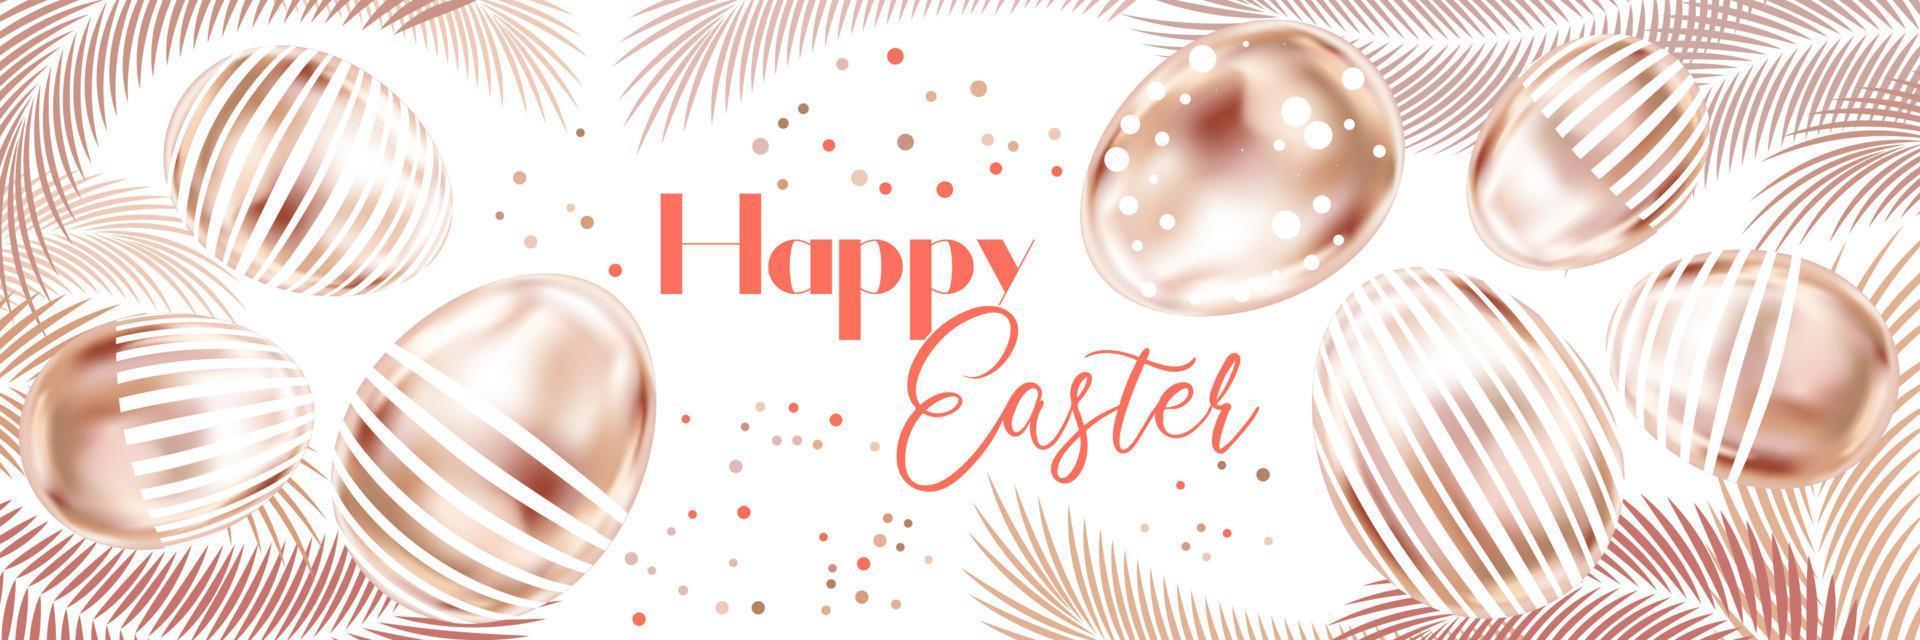 Happy Easter banner with pink gold eggs and palm branches on the white vector